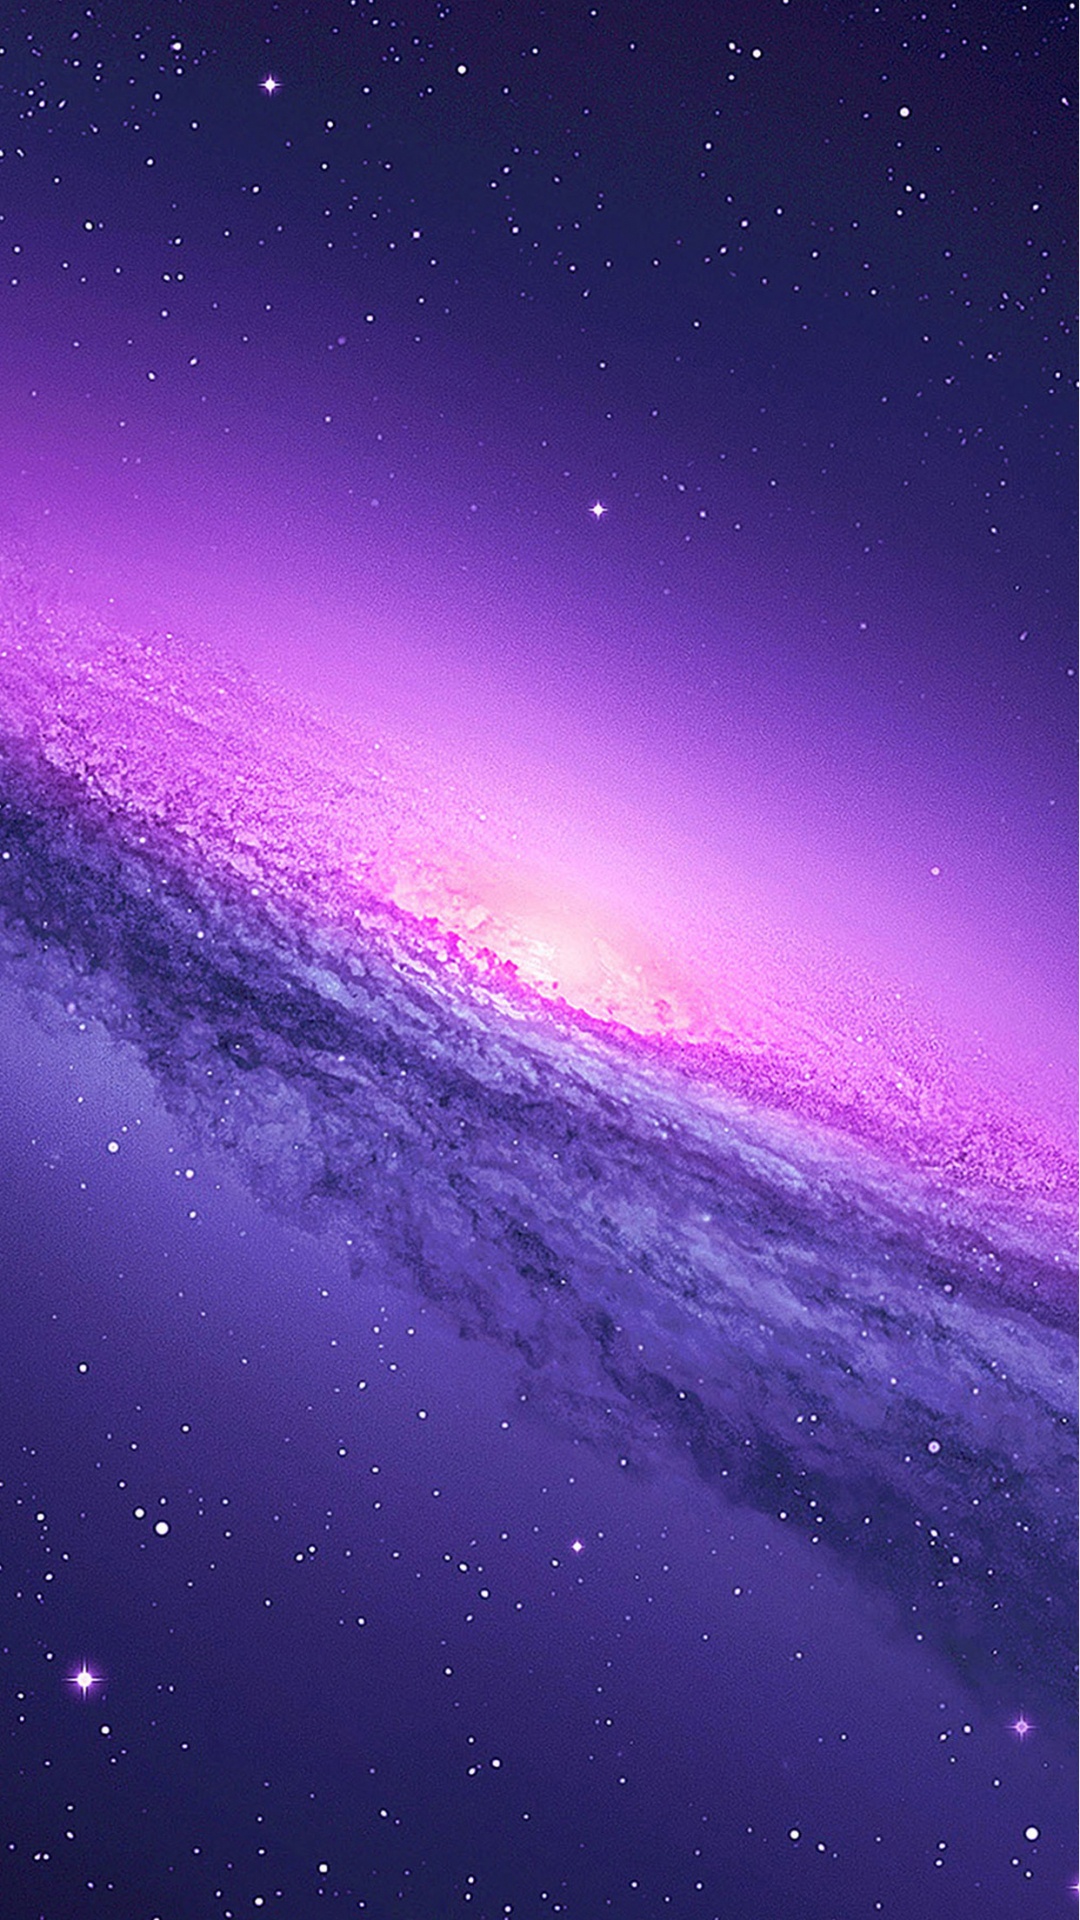 Purple and White Sky During Night Time. Wallpaper in 1080x1920 Resolution